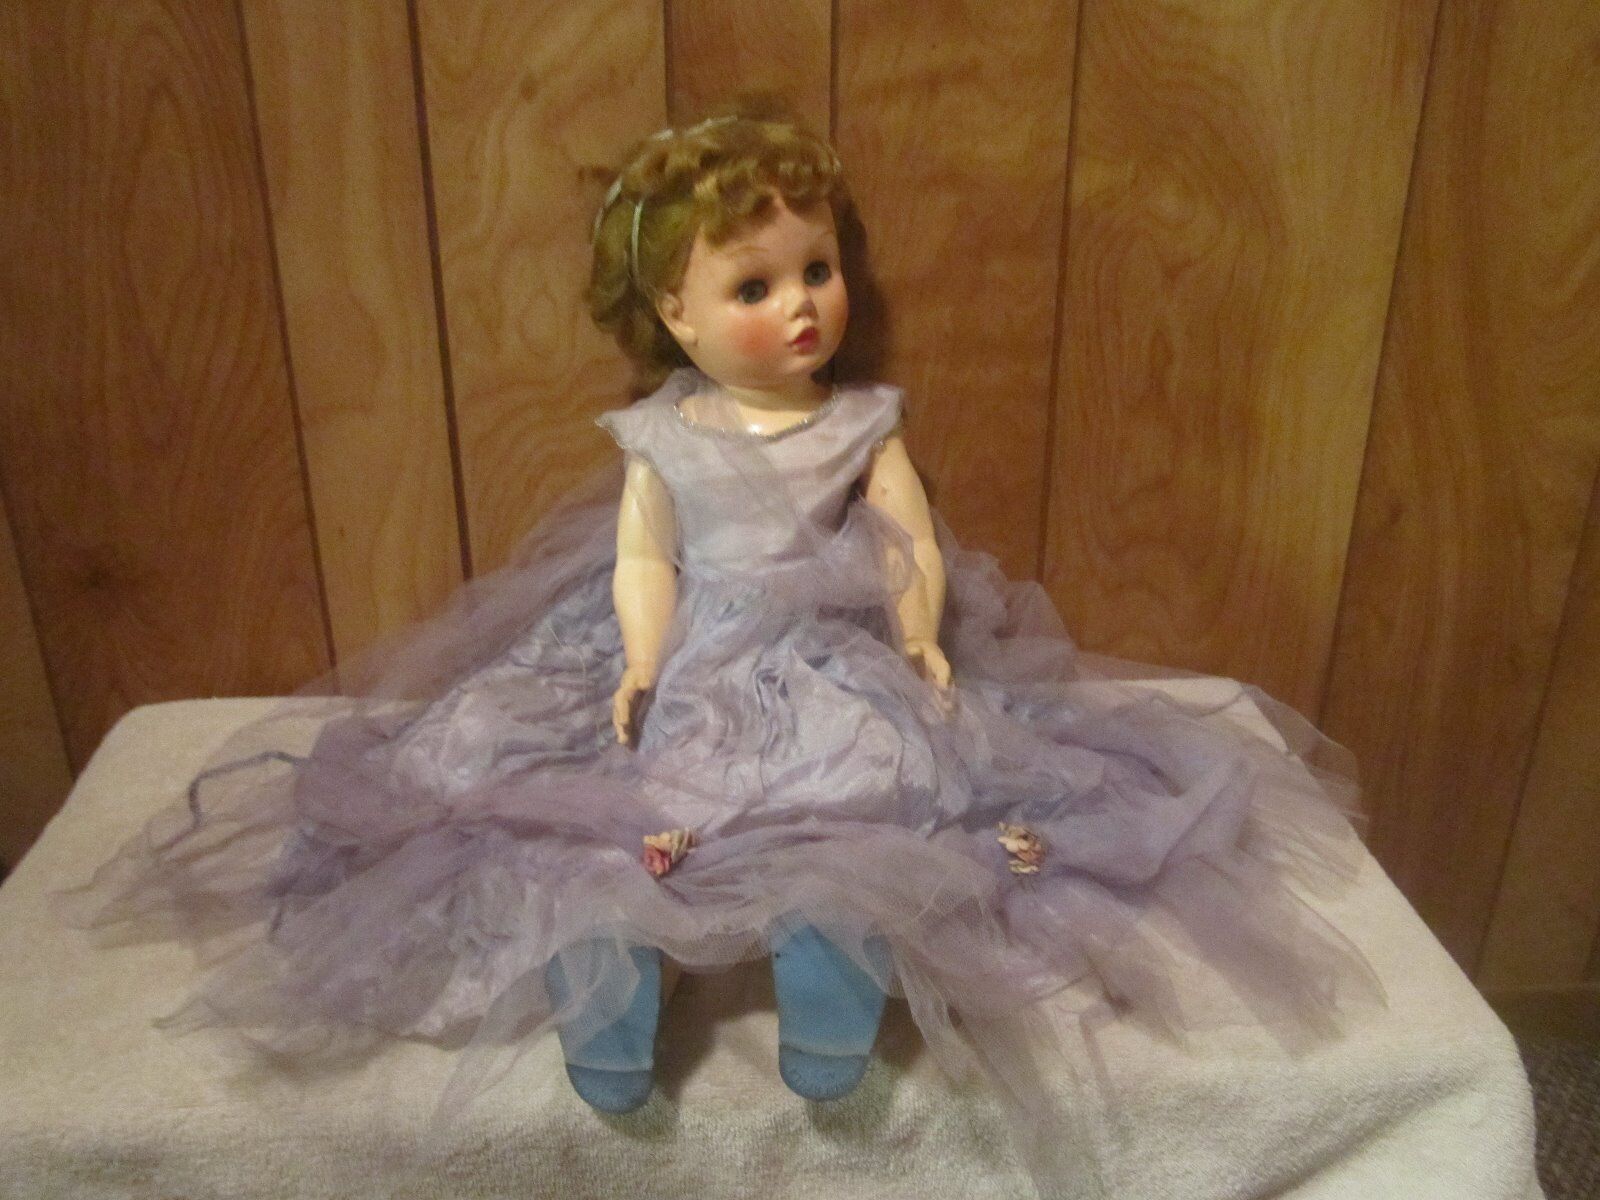 Vintage Cinderella Doll - In Original Dress And Shoes Made By Sayco